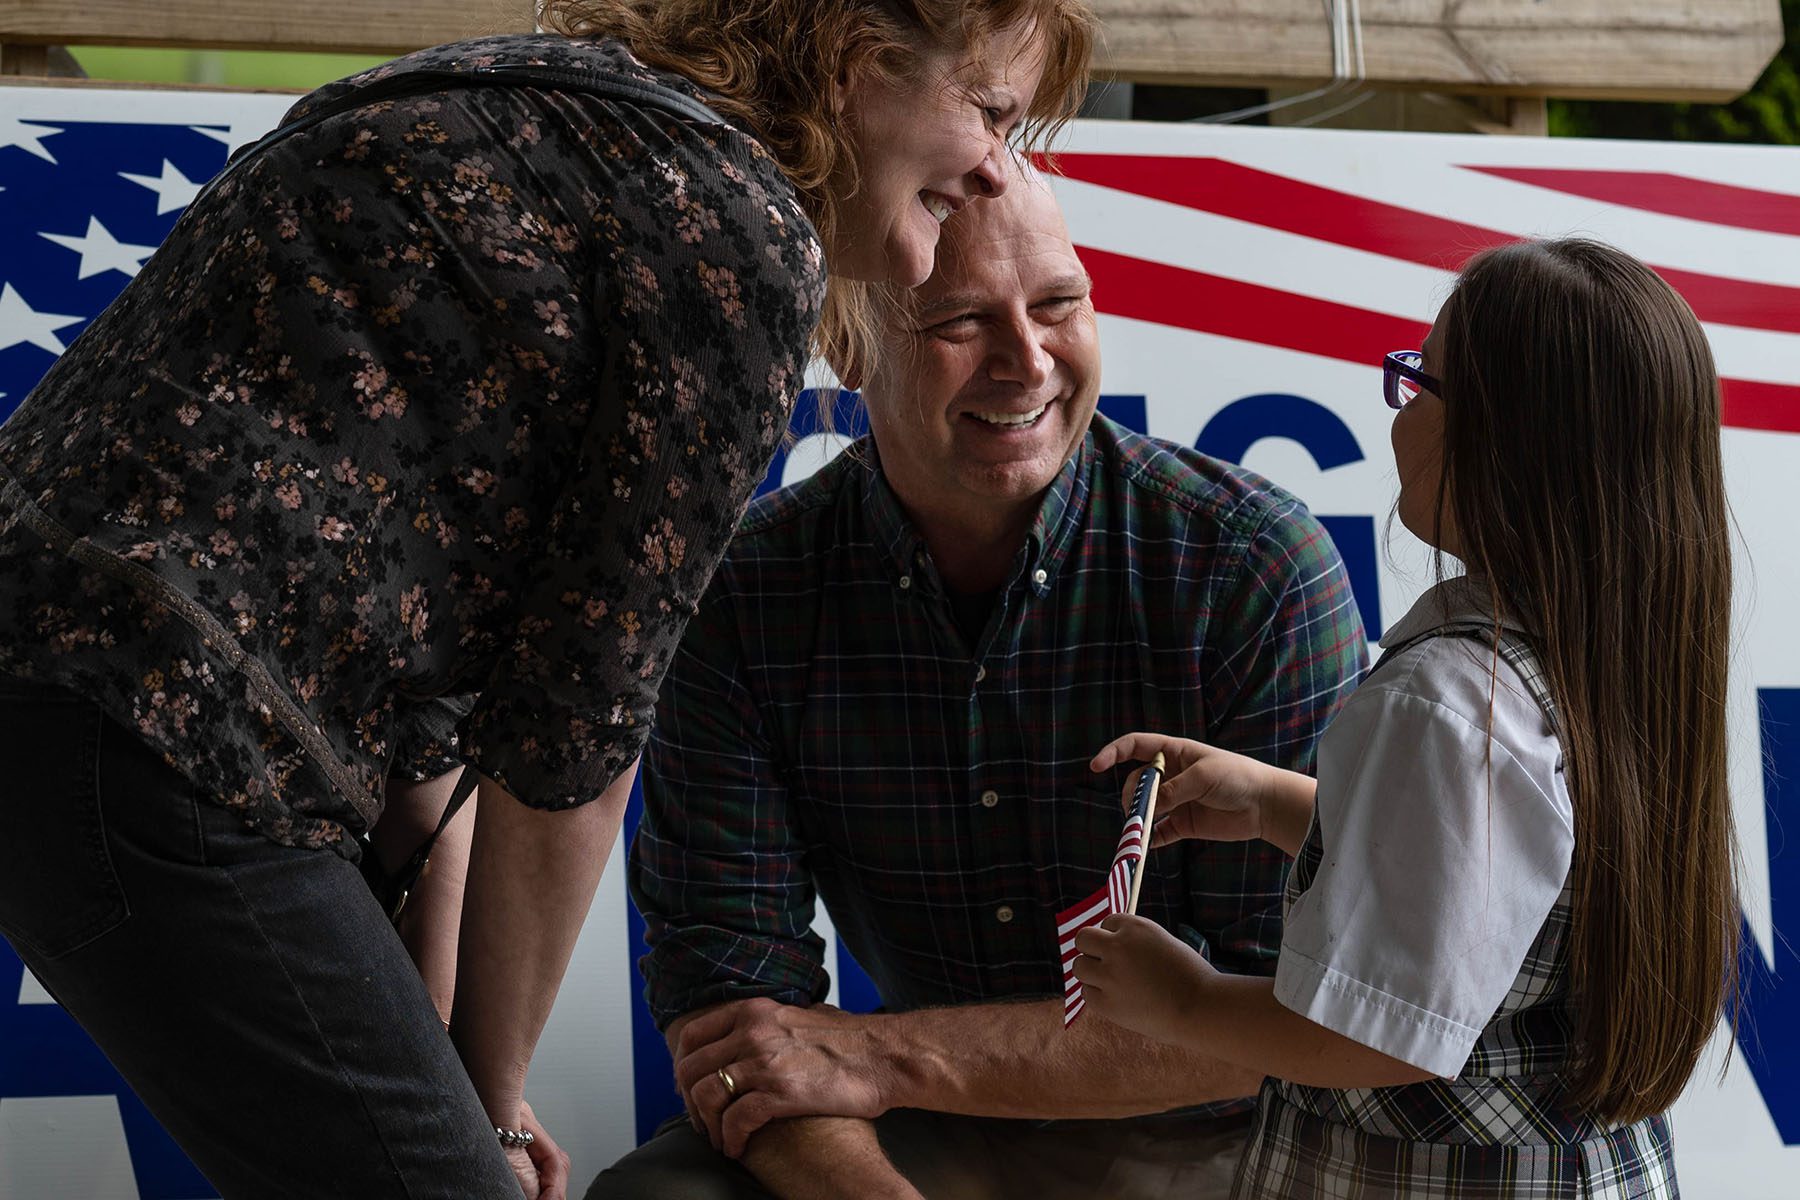 Doug Mastriano and his wife Rebecca smile as they speak to a child holding a small American flag.